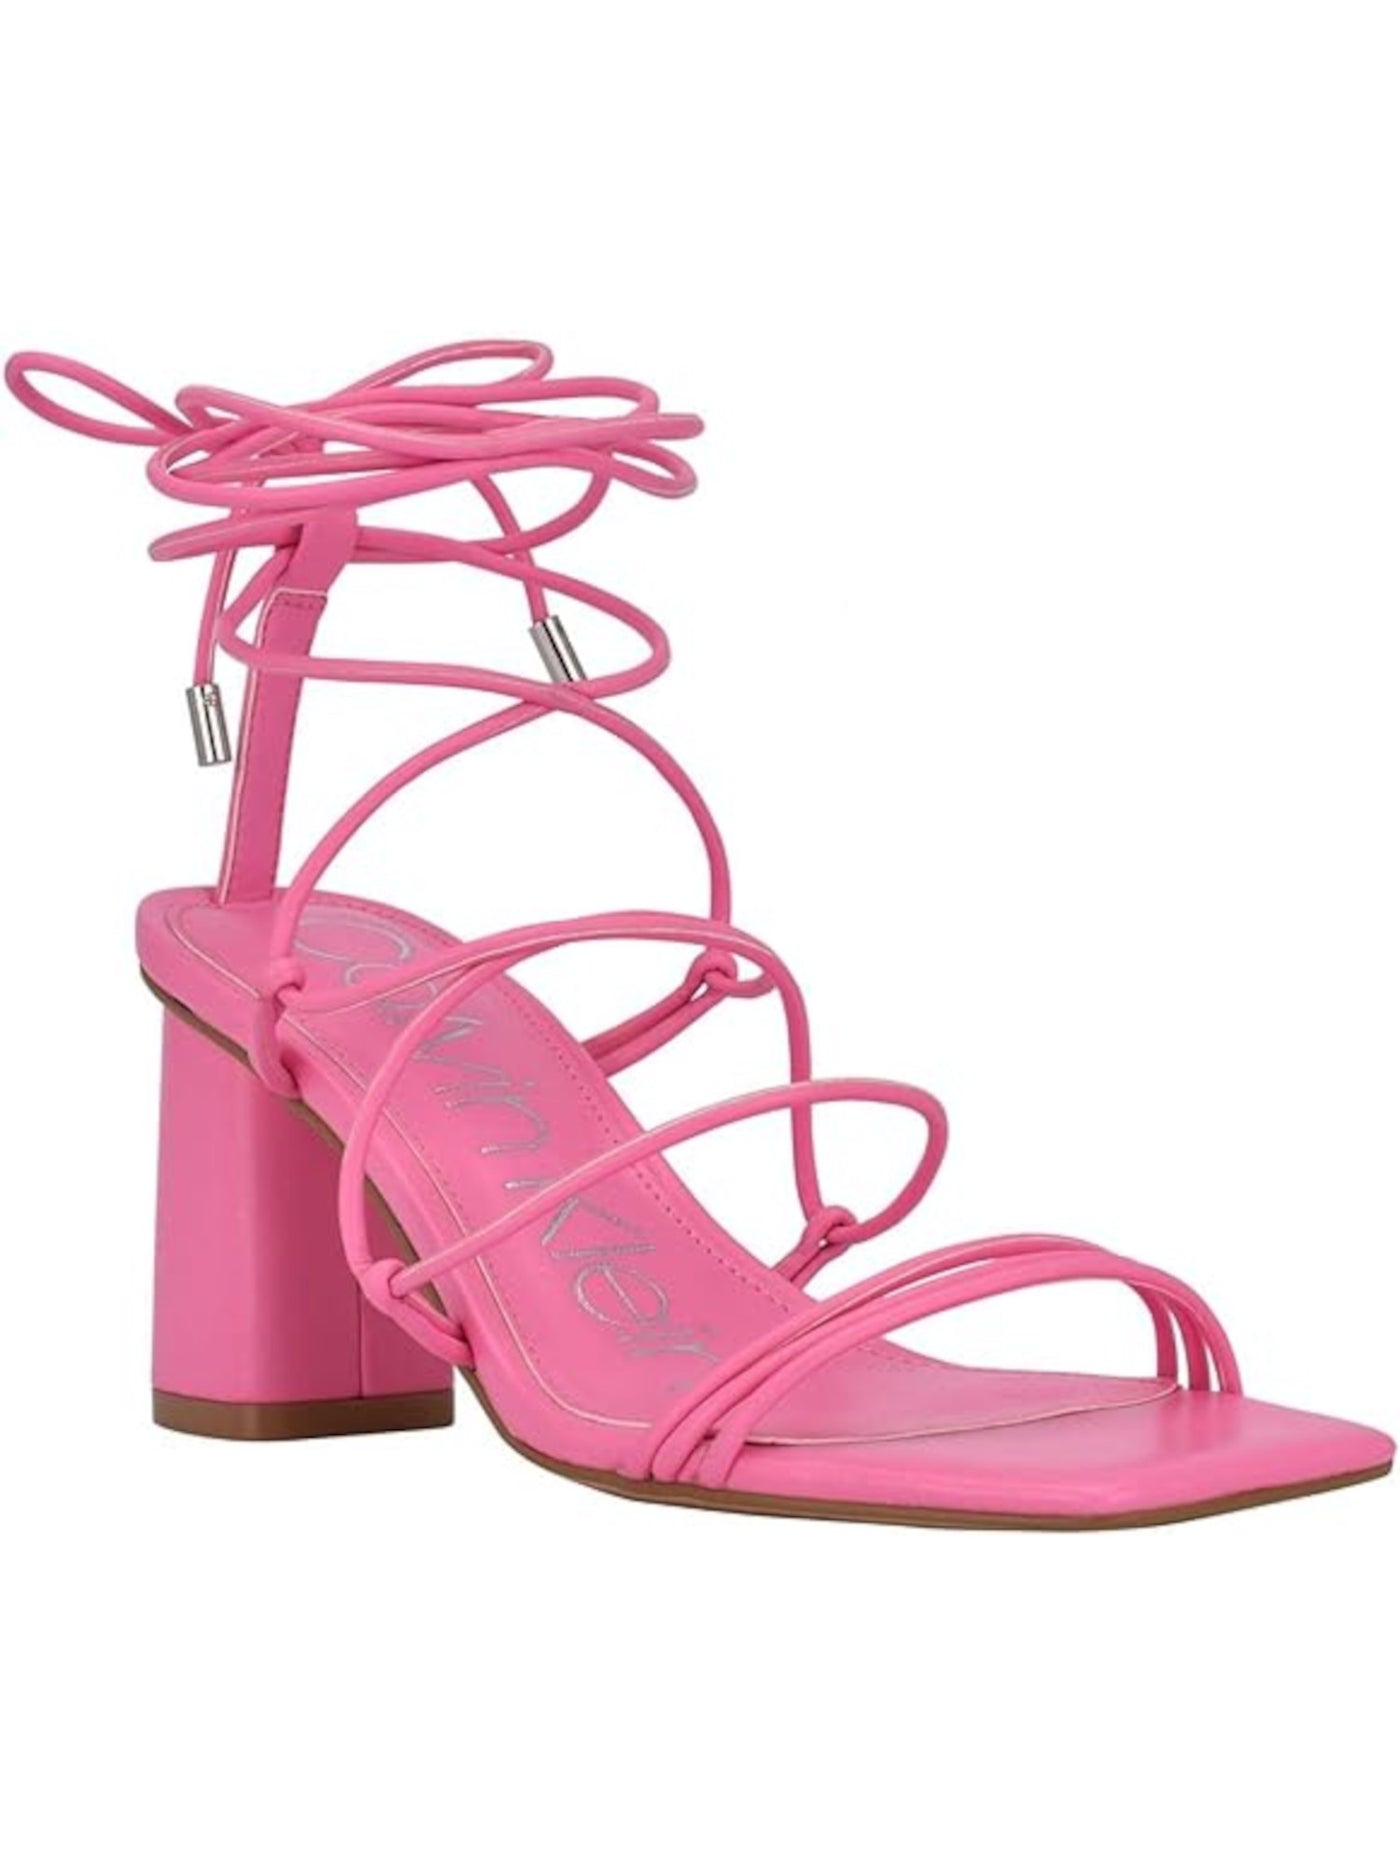 CALVIN KLEIN Womens Pink Padded Strappy Calista Square Toe Block Heel Lace-Up Heeled Sandal 11 M